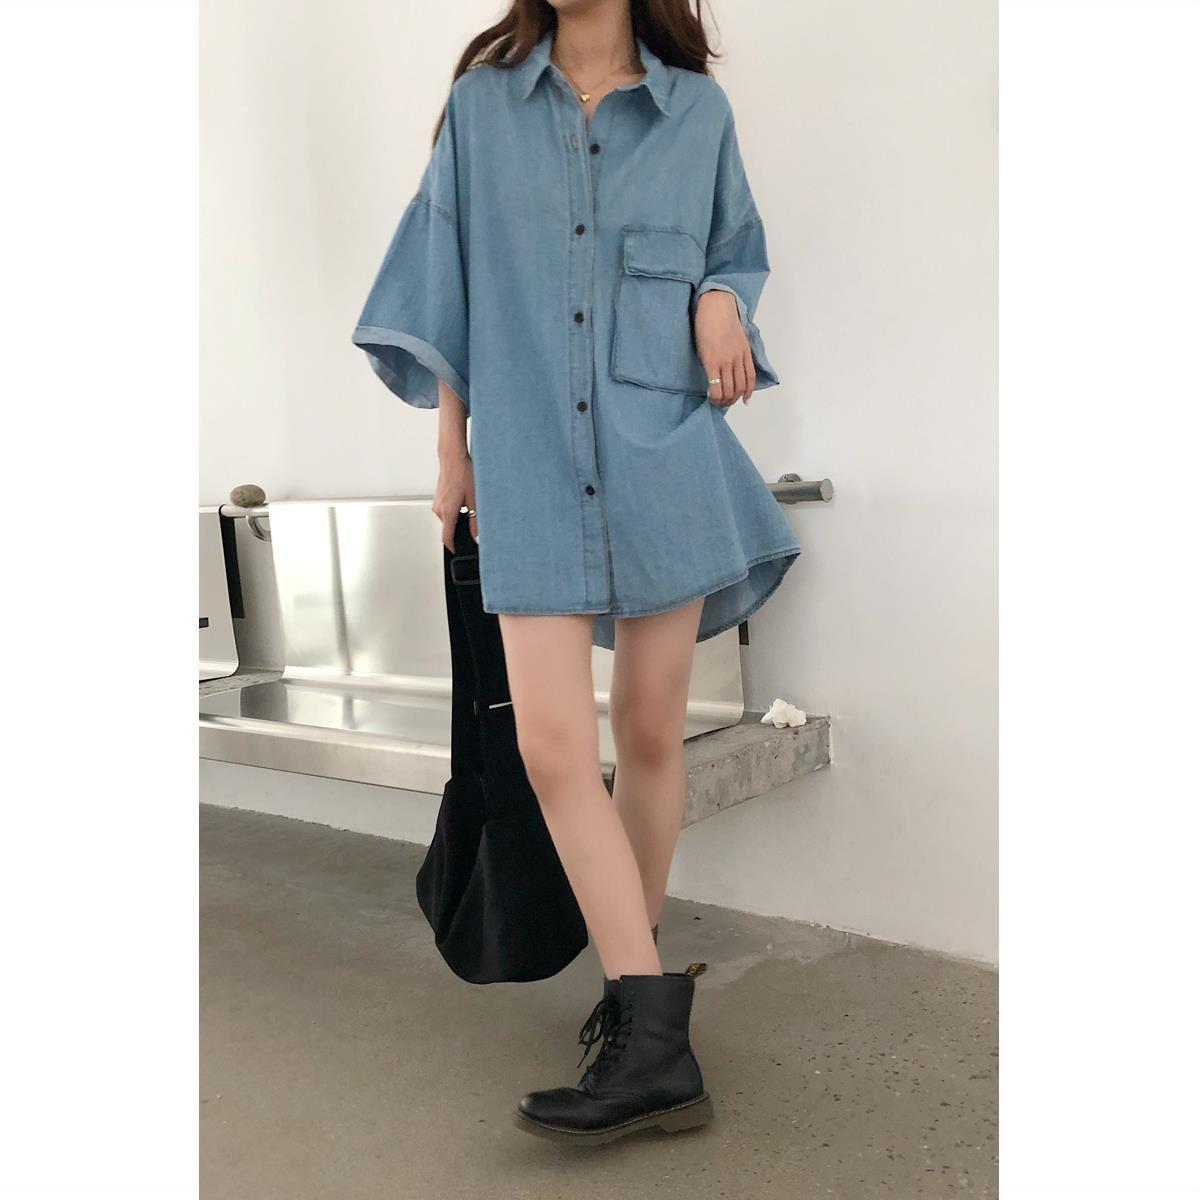 Denim shirt women's trendy thin section loose mid-length short-sleeved shirt summer bf large size lower body missing top women